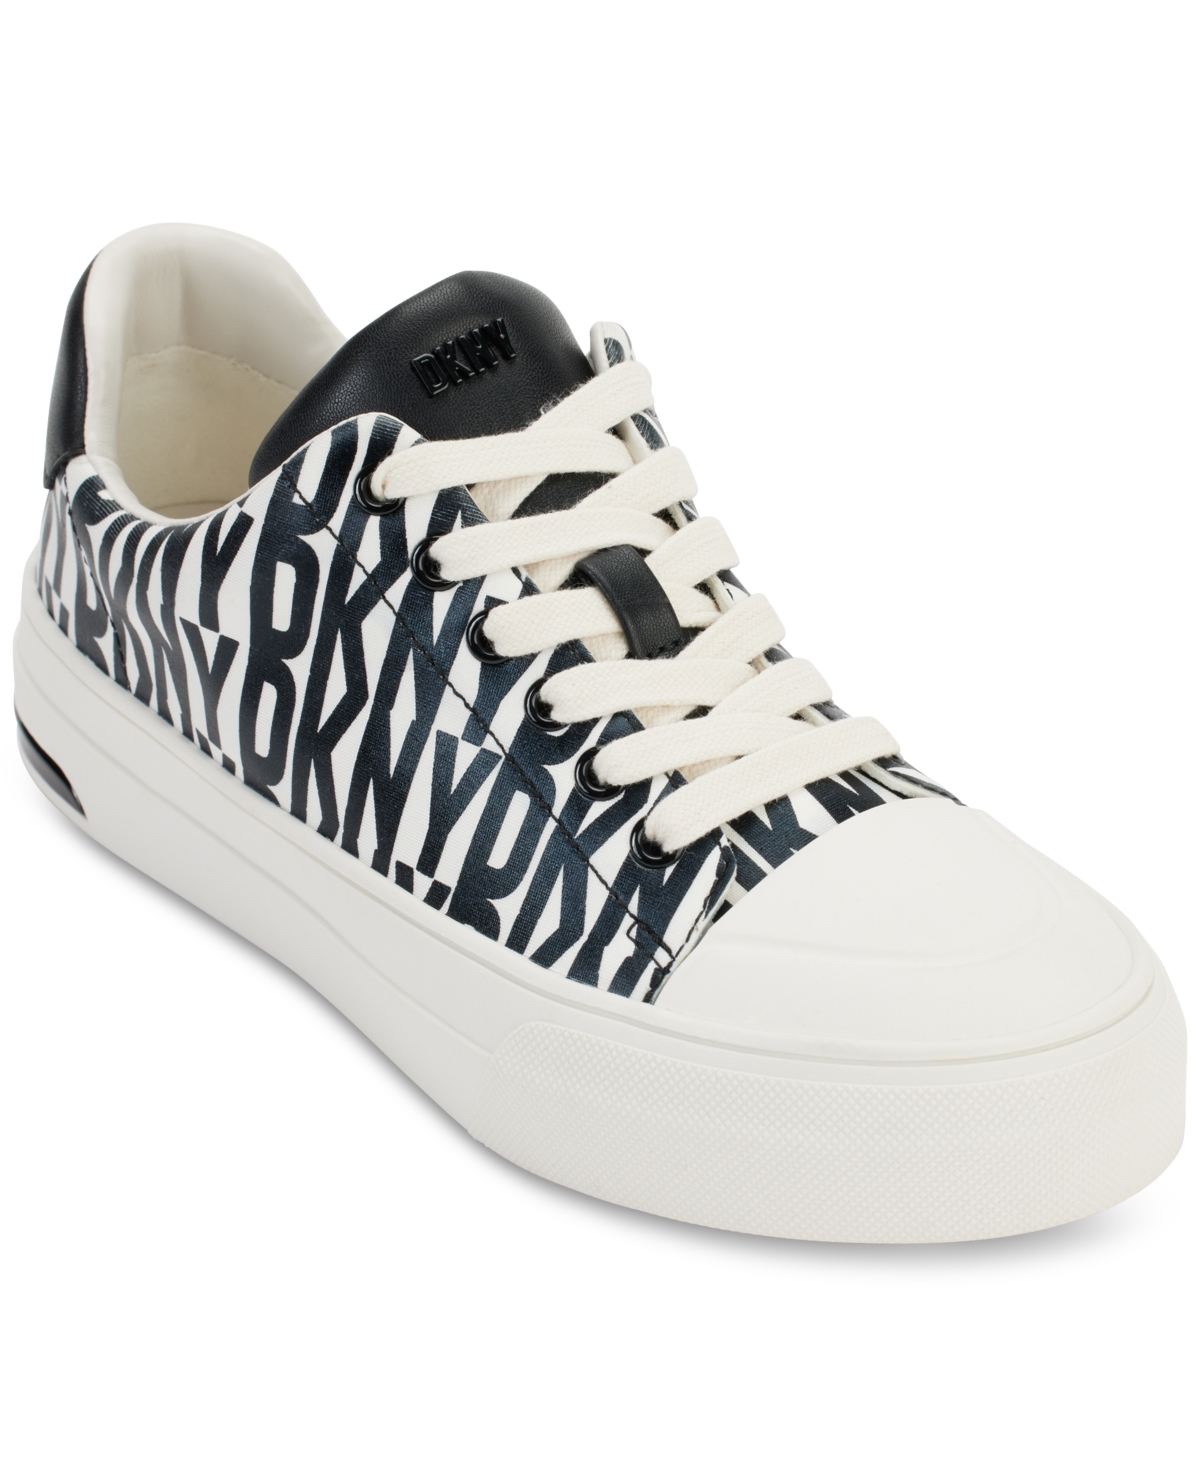 Dkny Women's York Lace-Up Low-Top Sneakers - Black/ Eggnog